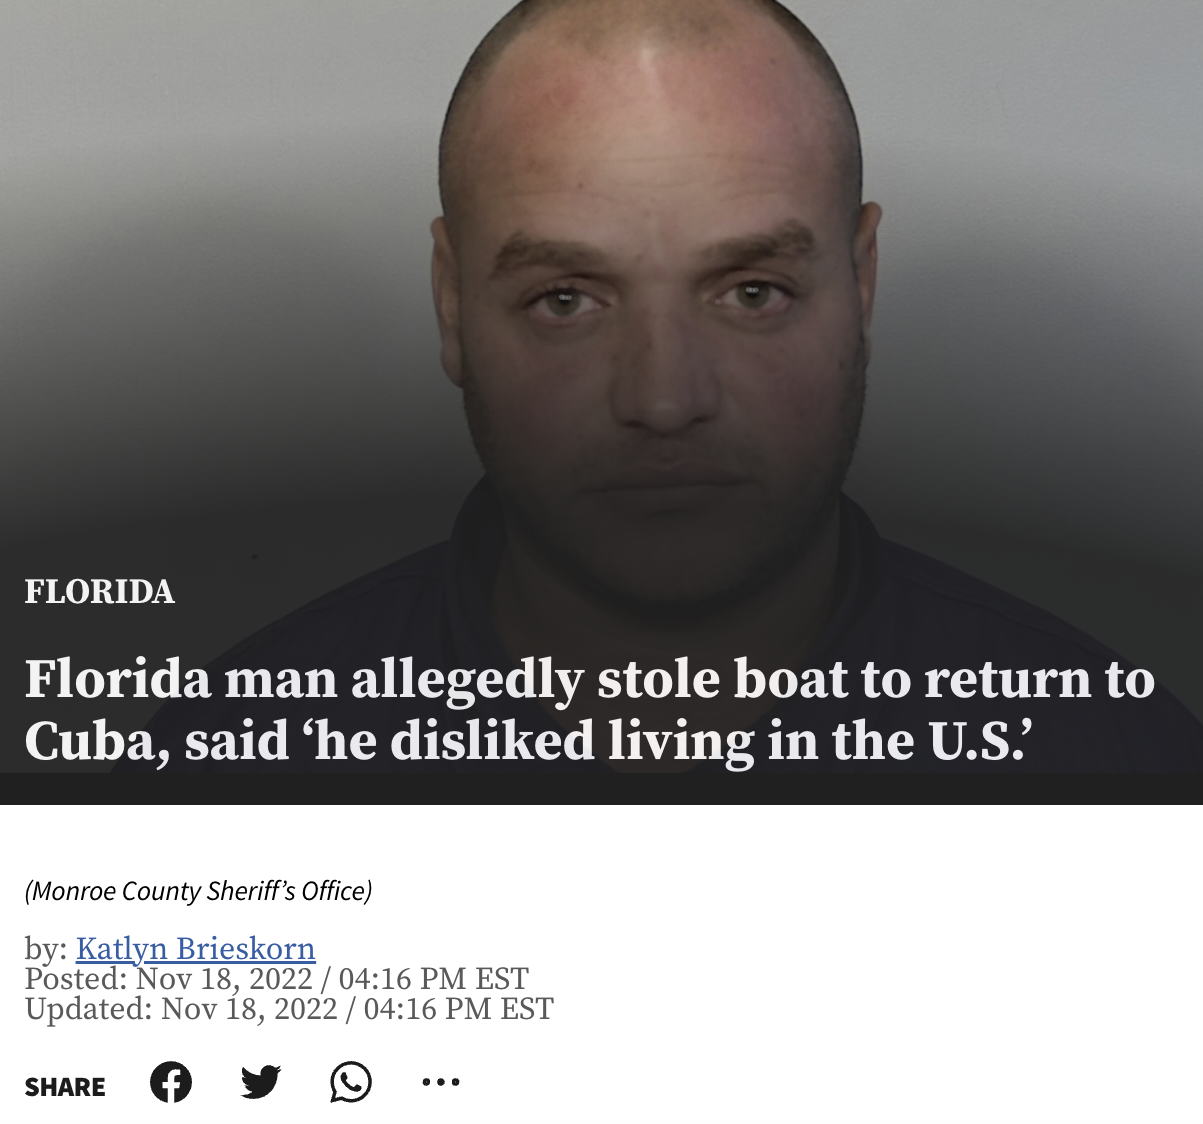 Best of Florida Man 2022 - heineken dark - Florida Florida man allegedly stole boat to return to Cuba, said 'he disd living in the U.S.' Monroe County Sheriff's Office by Katlyn Brieskorn Posted Est Updated Est